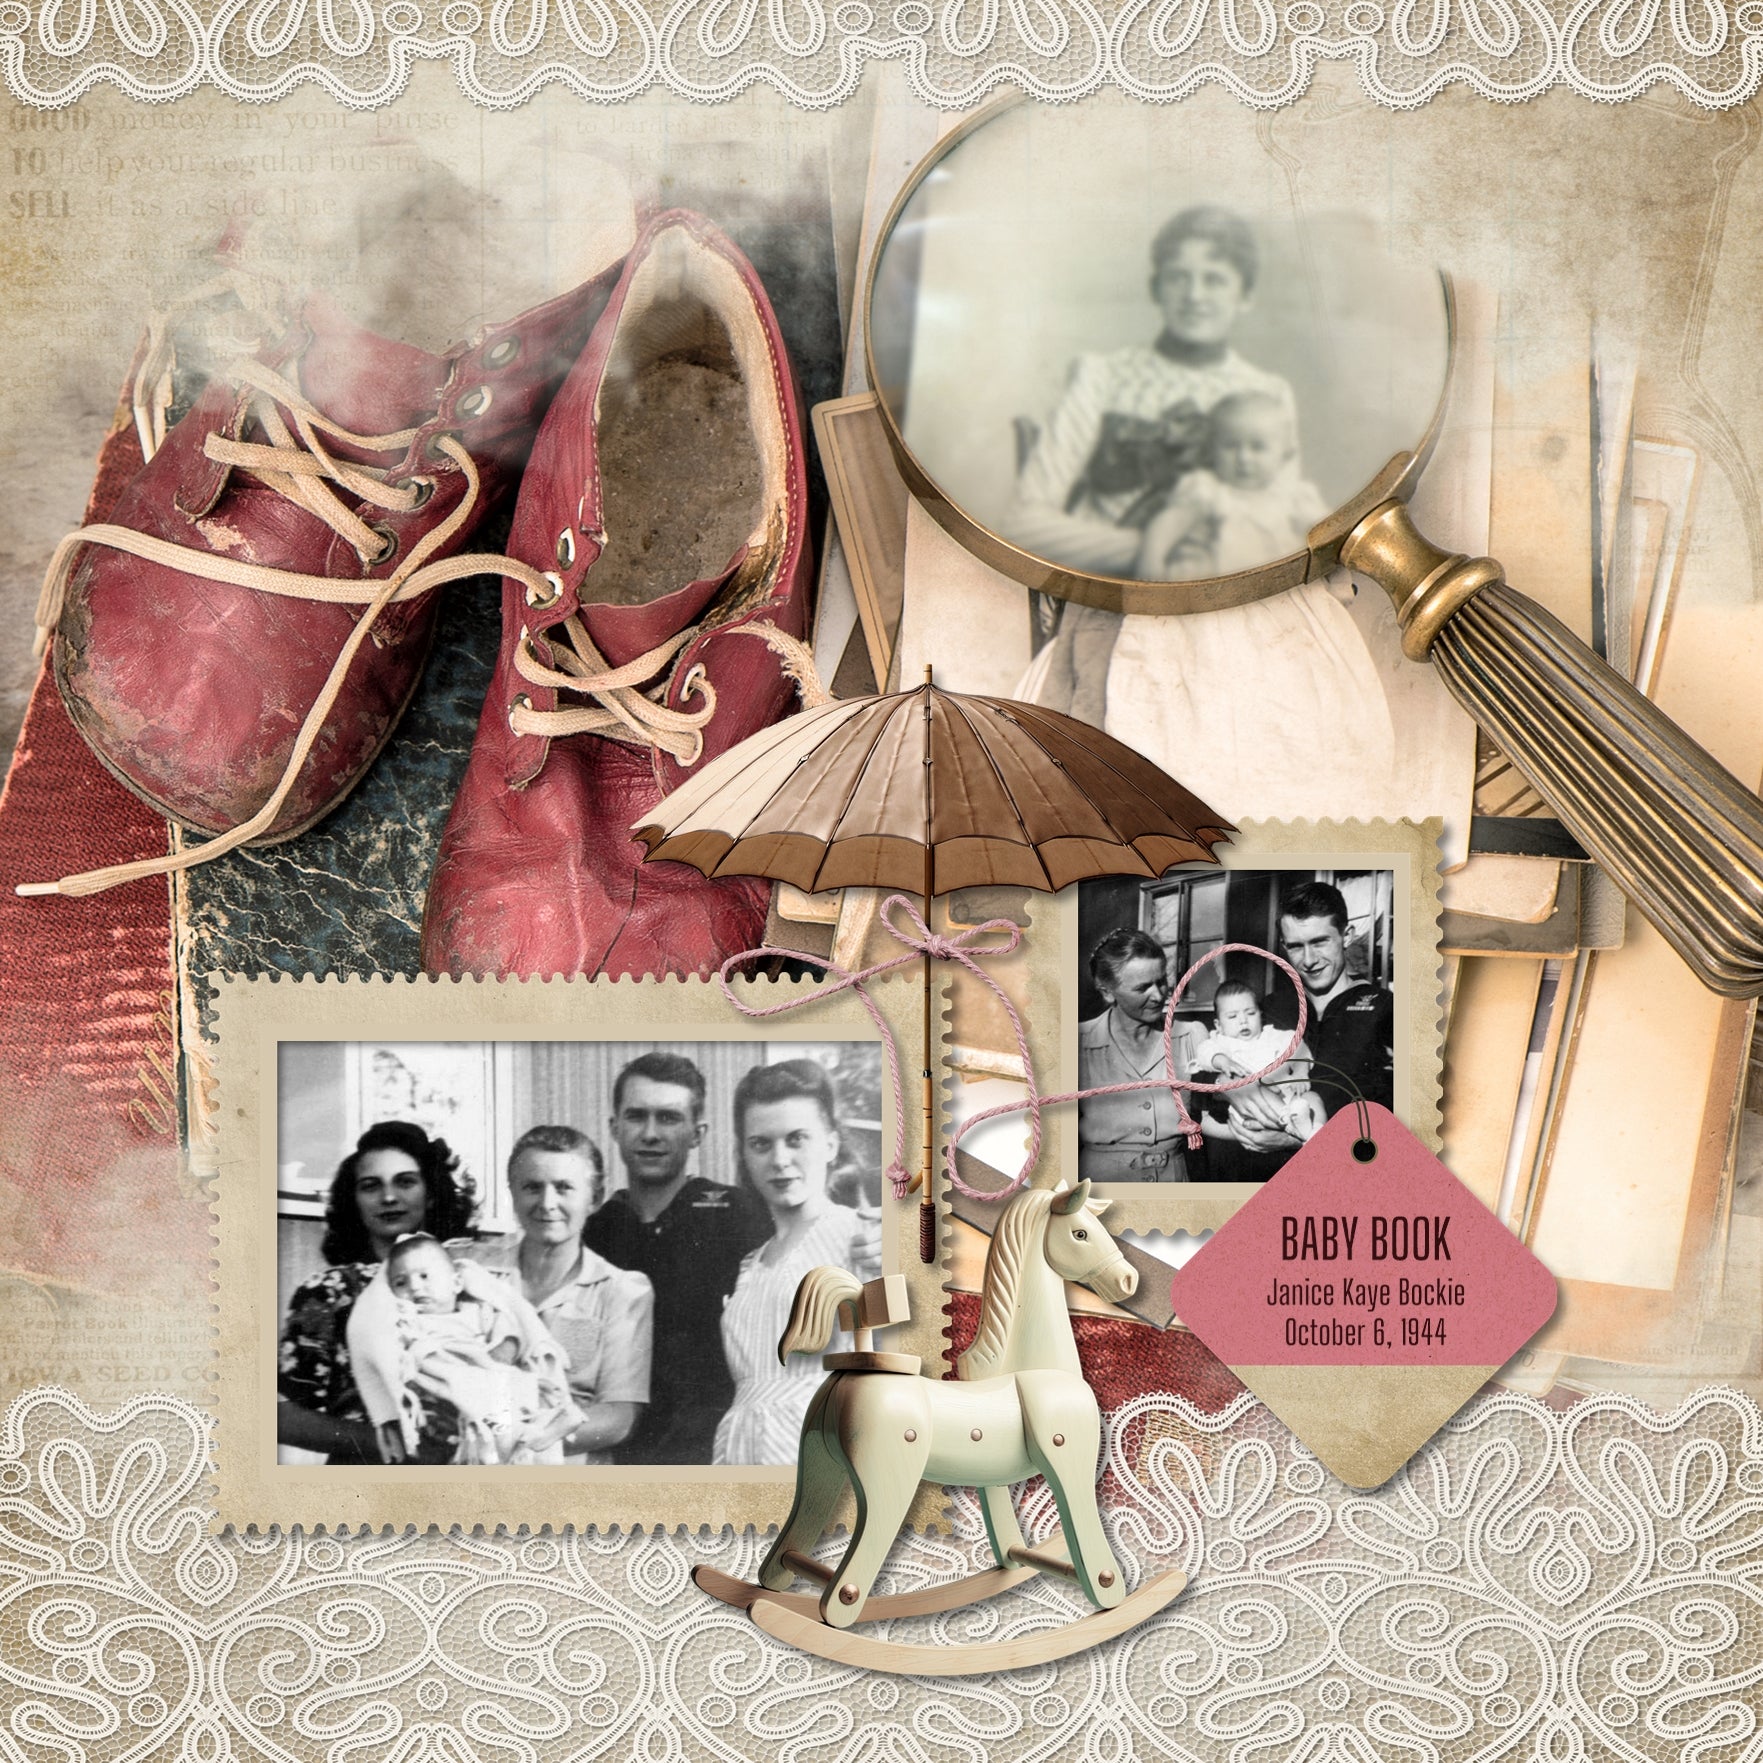 Great for genealogy and family history albums and keepsake digital art pages, these realistic antique digital scrapbooking embellishments by Lucky Girl Creative are perfect for layering with your antique photographs to give that realistic vintage look. Whether you love browsing through a flea market, vintage market, rummage or garage sale, these embellishments will showcase your treasured finds.